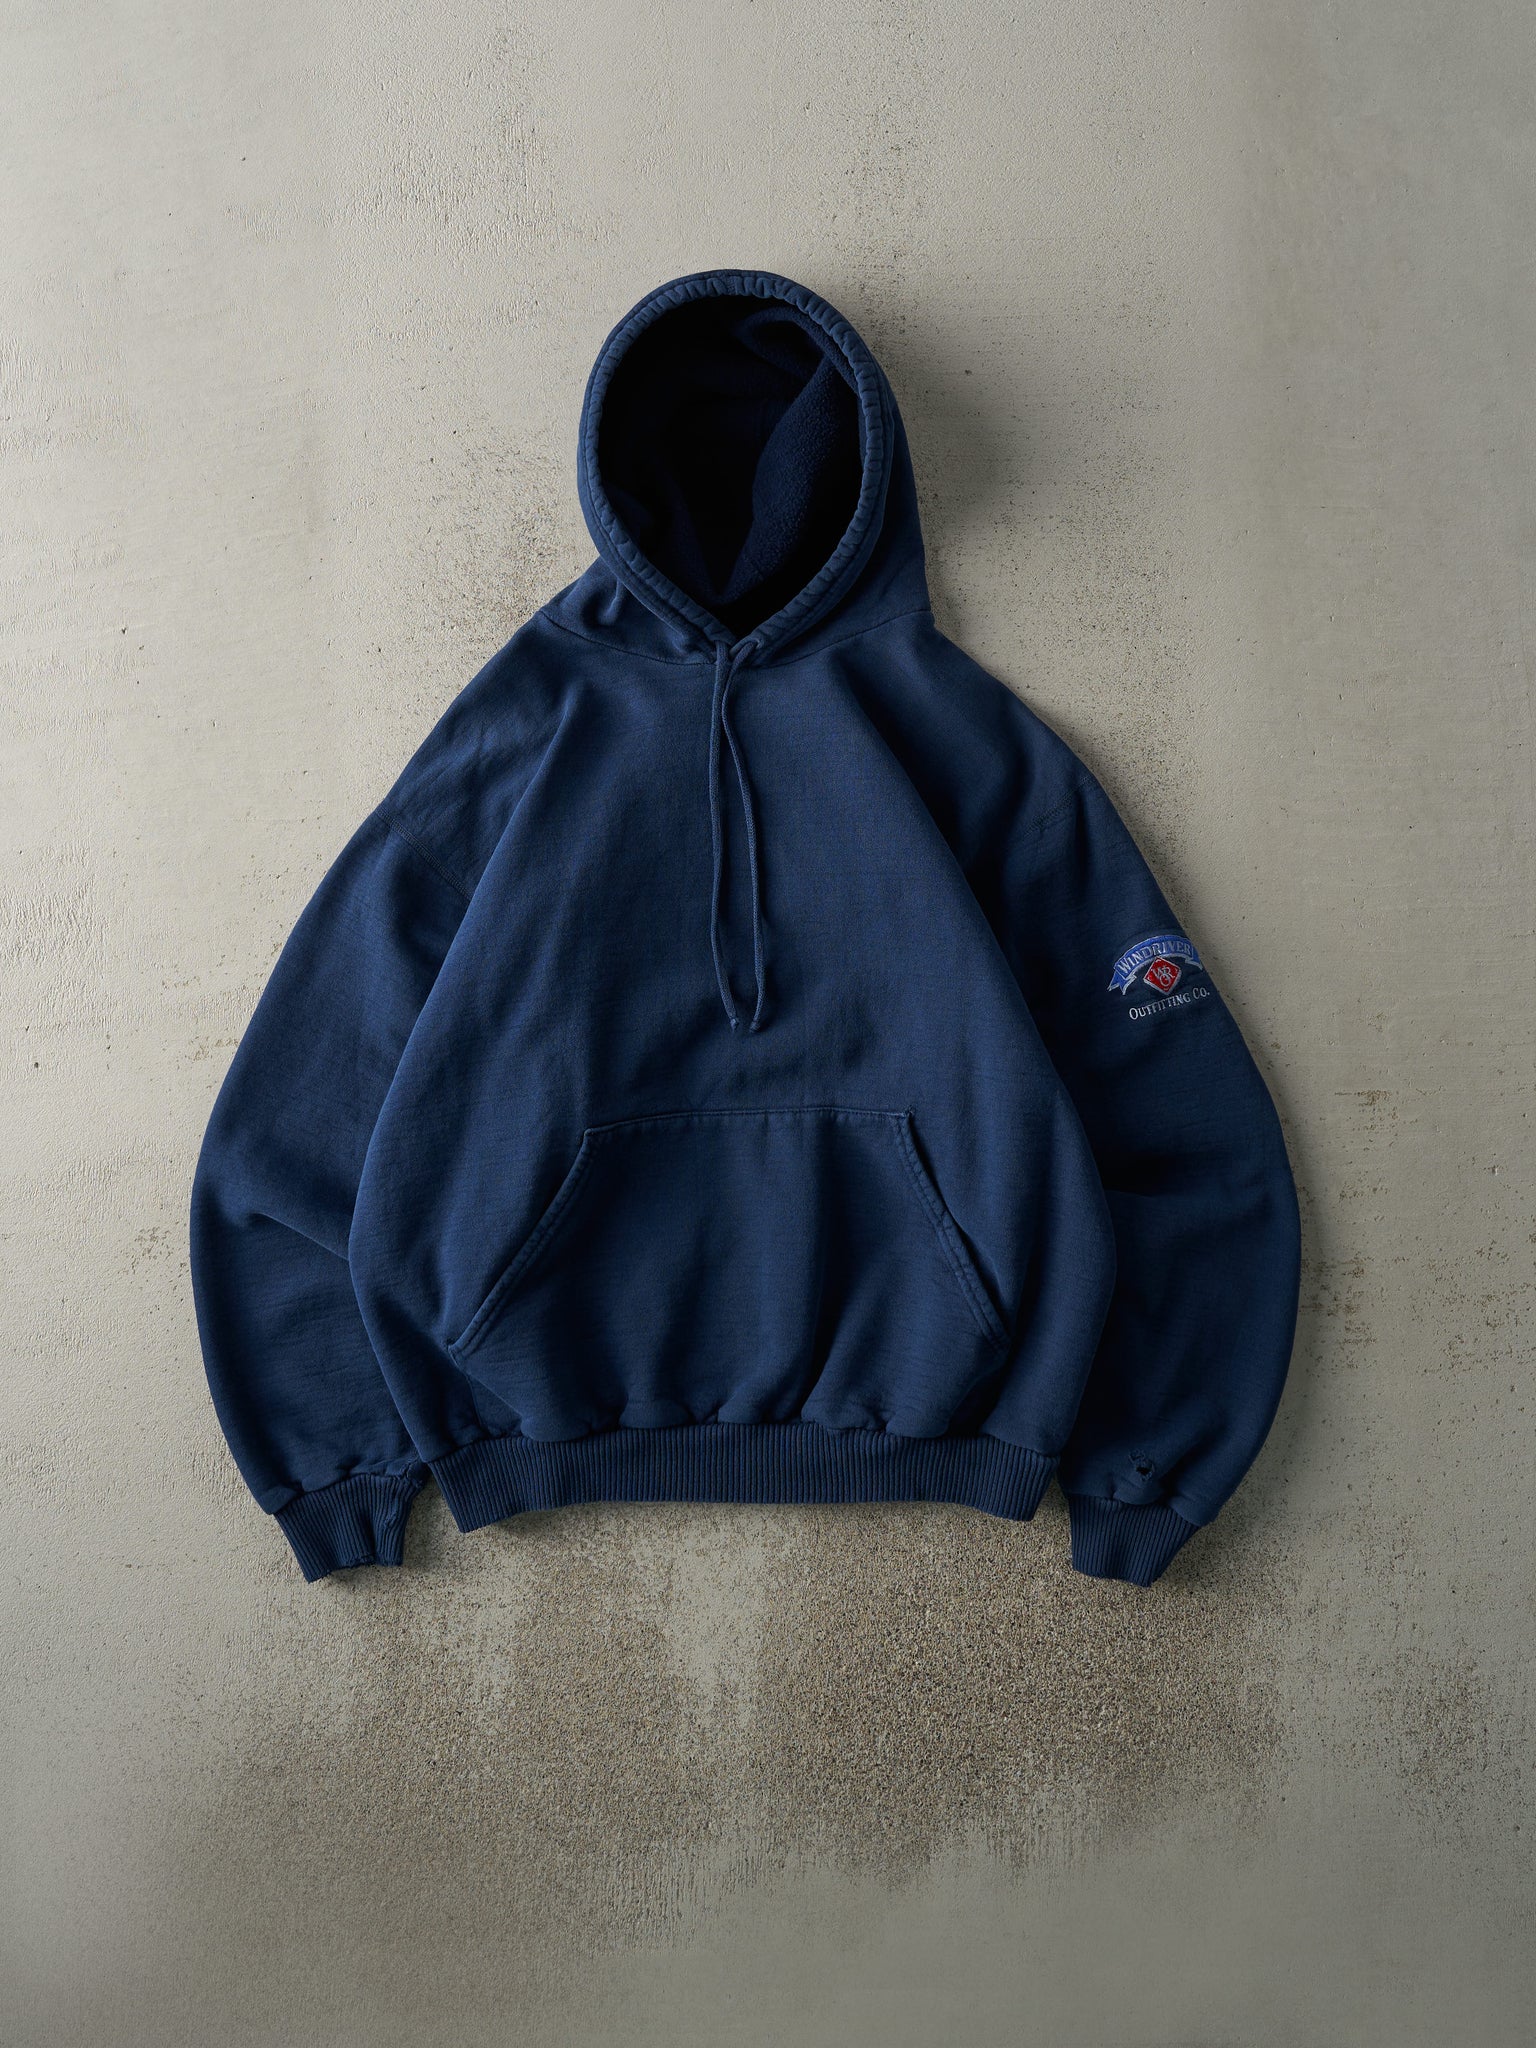 Vintage 90s Navy Blue Embroidered Wind River Hoodie (S/M)